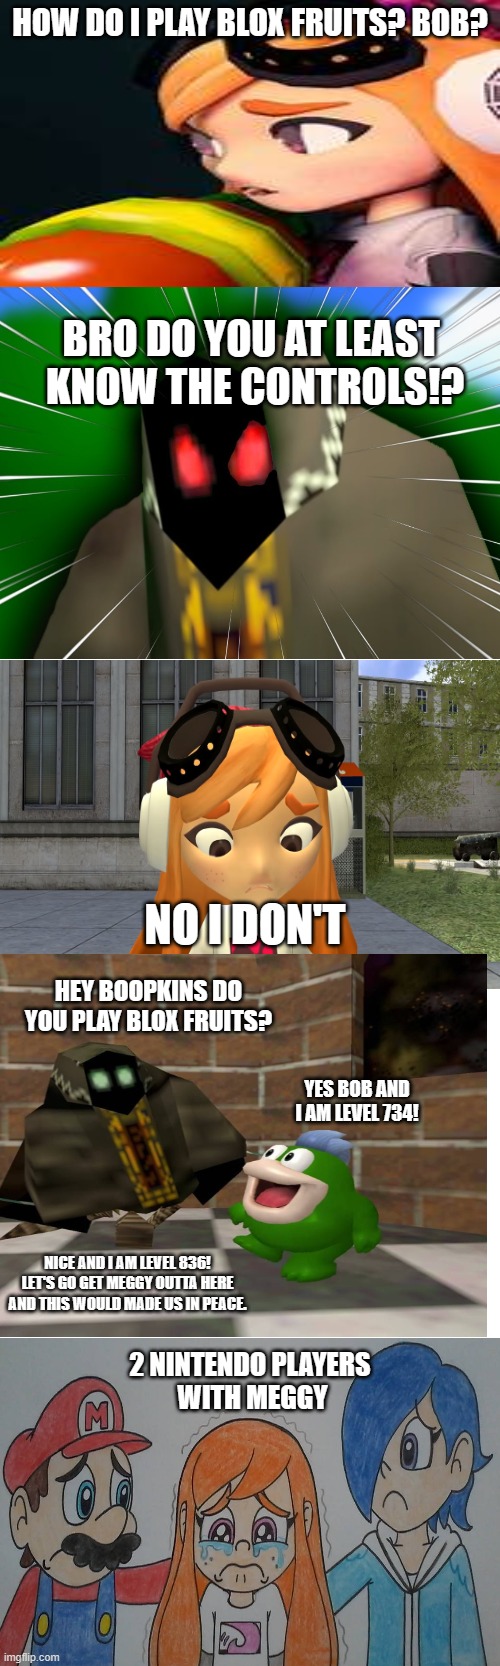 A smg4+blox fruits Meme | HOW DO I PLAY BLOX FRUITS? BOB? BRO DO YOU AT LEAST 
KNOW THE CONTROLS!? NO I DON'T; HEY BOOPKINS DO YOU PLAY BLOX FRUITS? YES BOB AND I AM LEVEL 734! NICE AND I AM LEVEL 836! LET'S GO GET MEGGY OUTTA HERE AND THIS WOULD MADE US IN PEACE. 2 NINTENDO PLAYERS 
WITH MEGGY | made w/ Imgflip meme maker